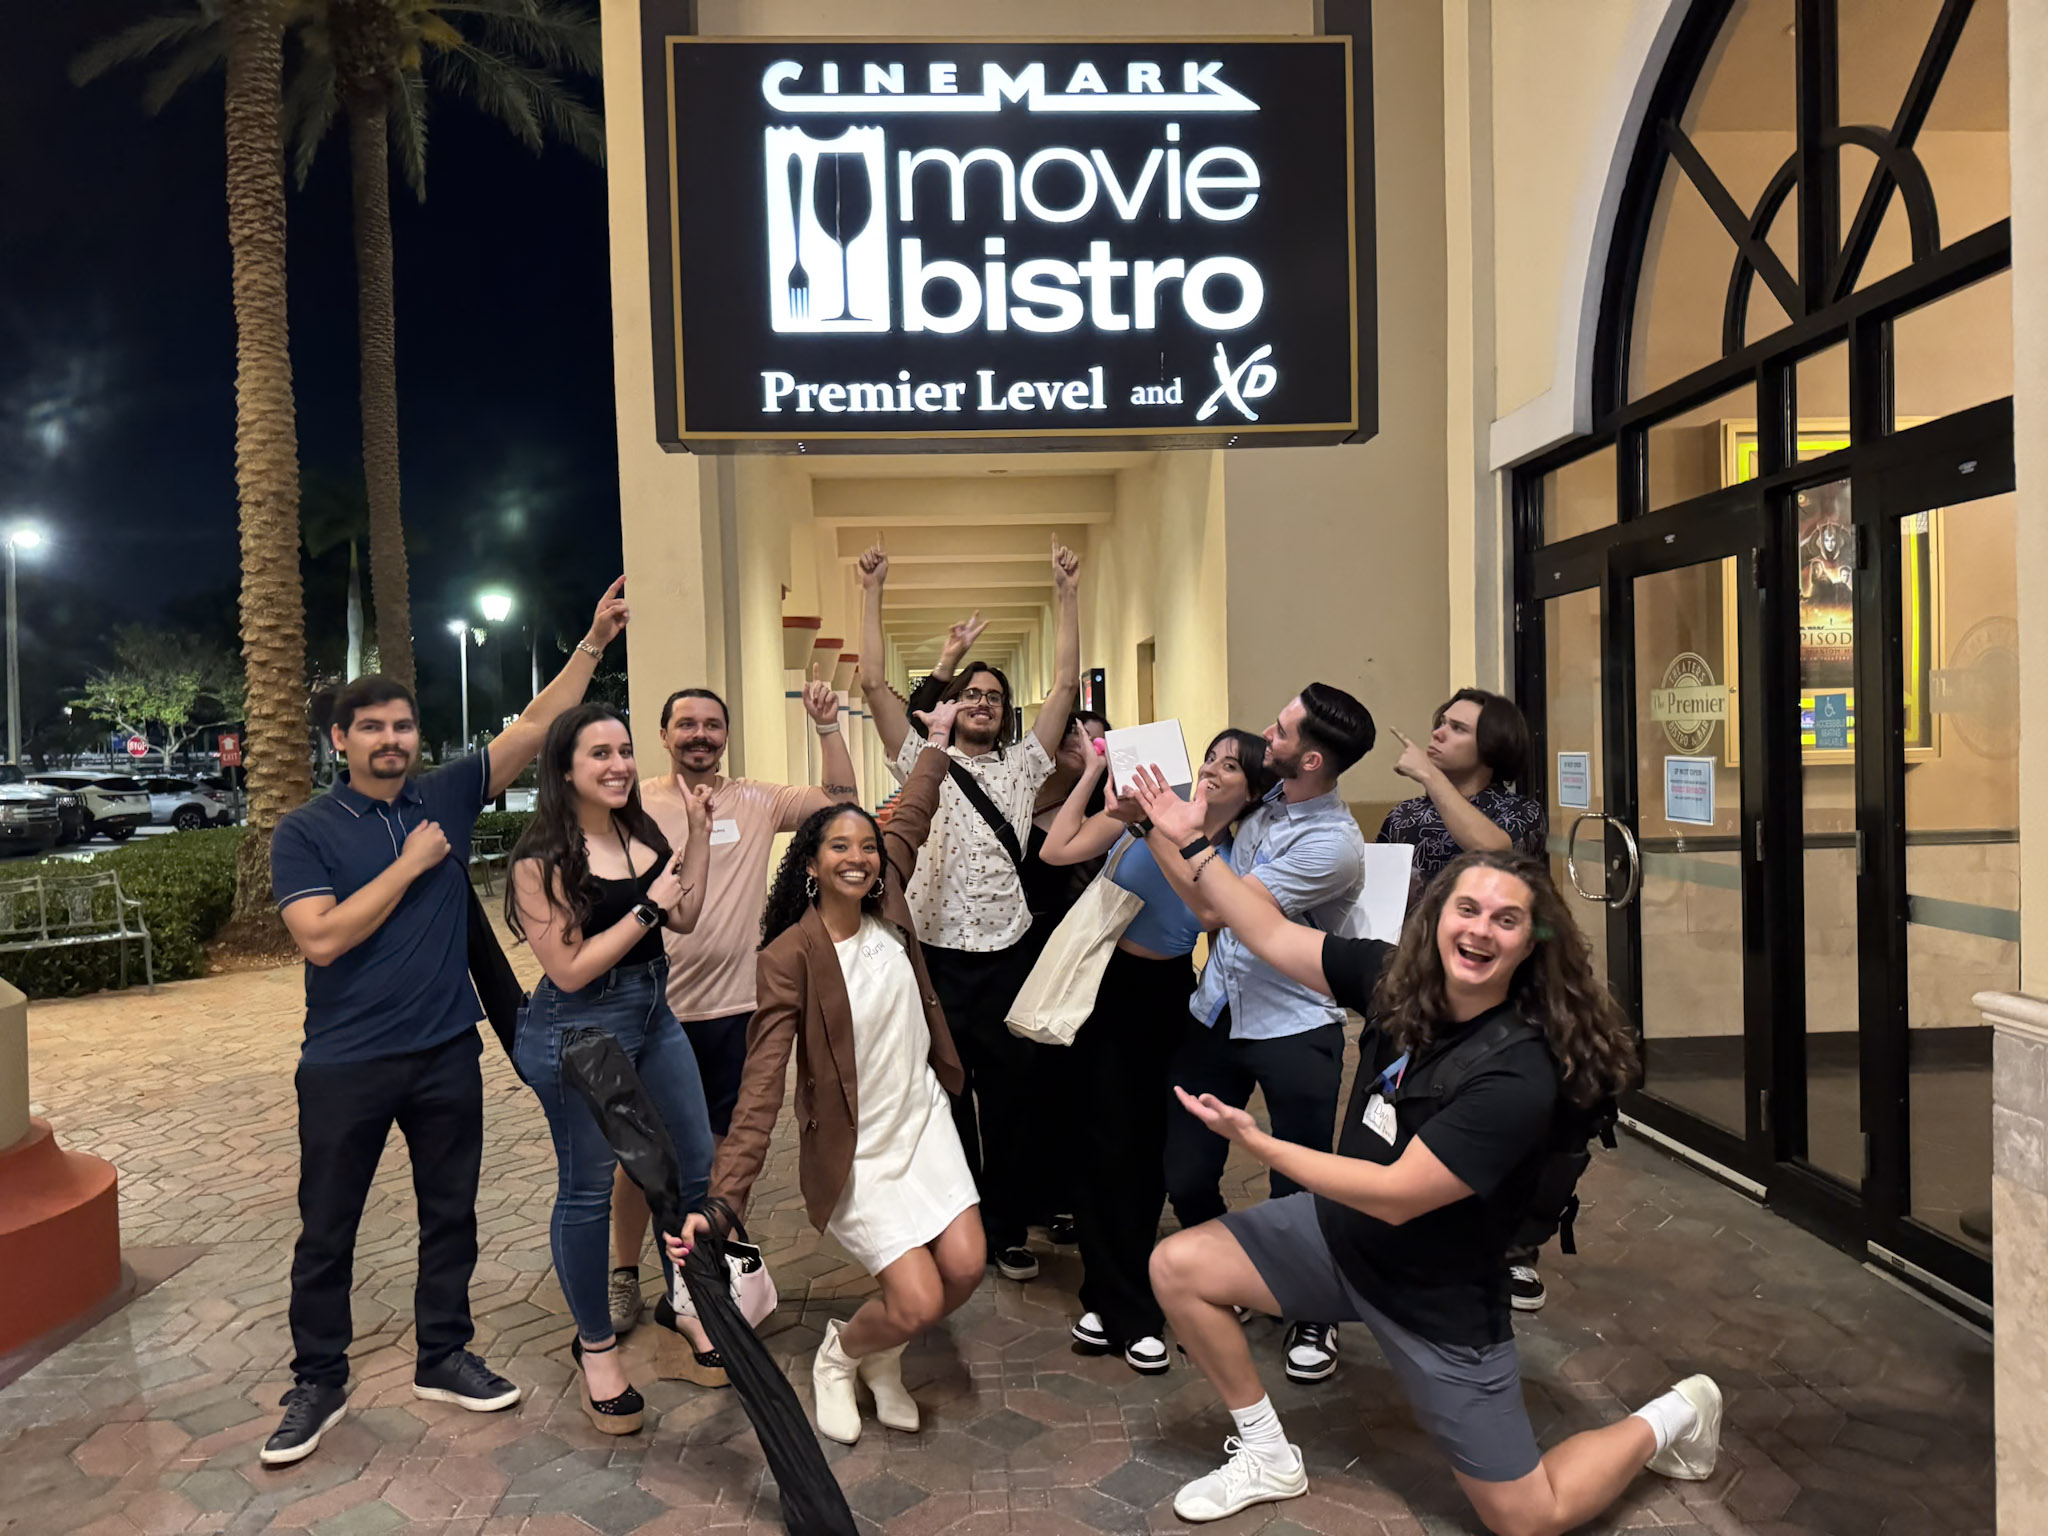 TENM event participants point outside towards the Cinemark Movie Bistro Sign.